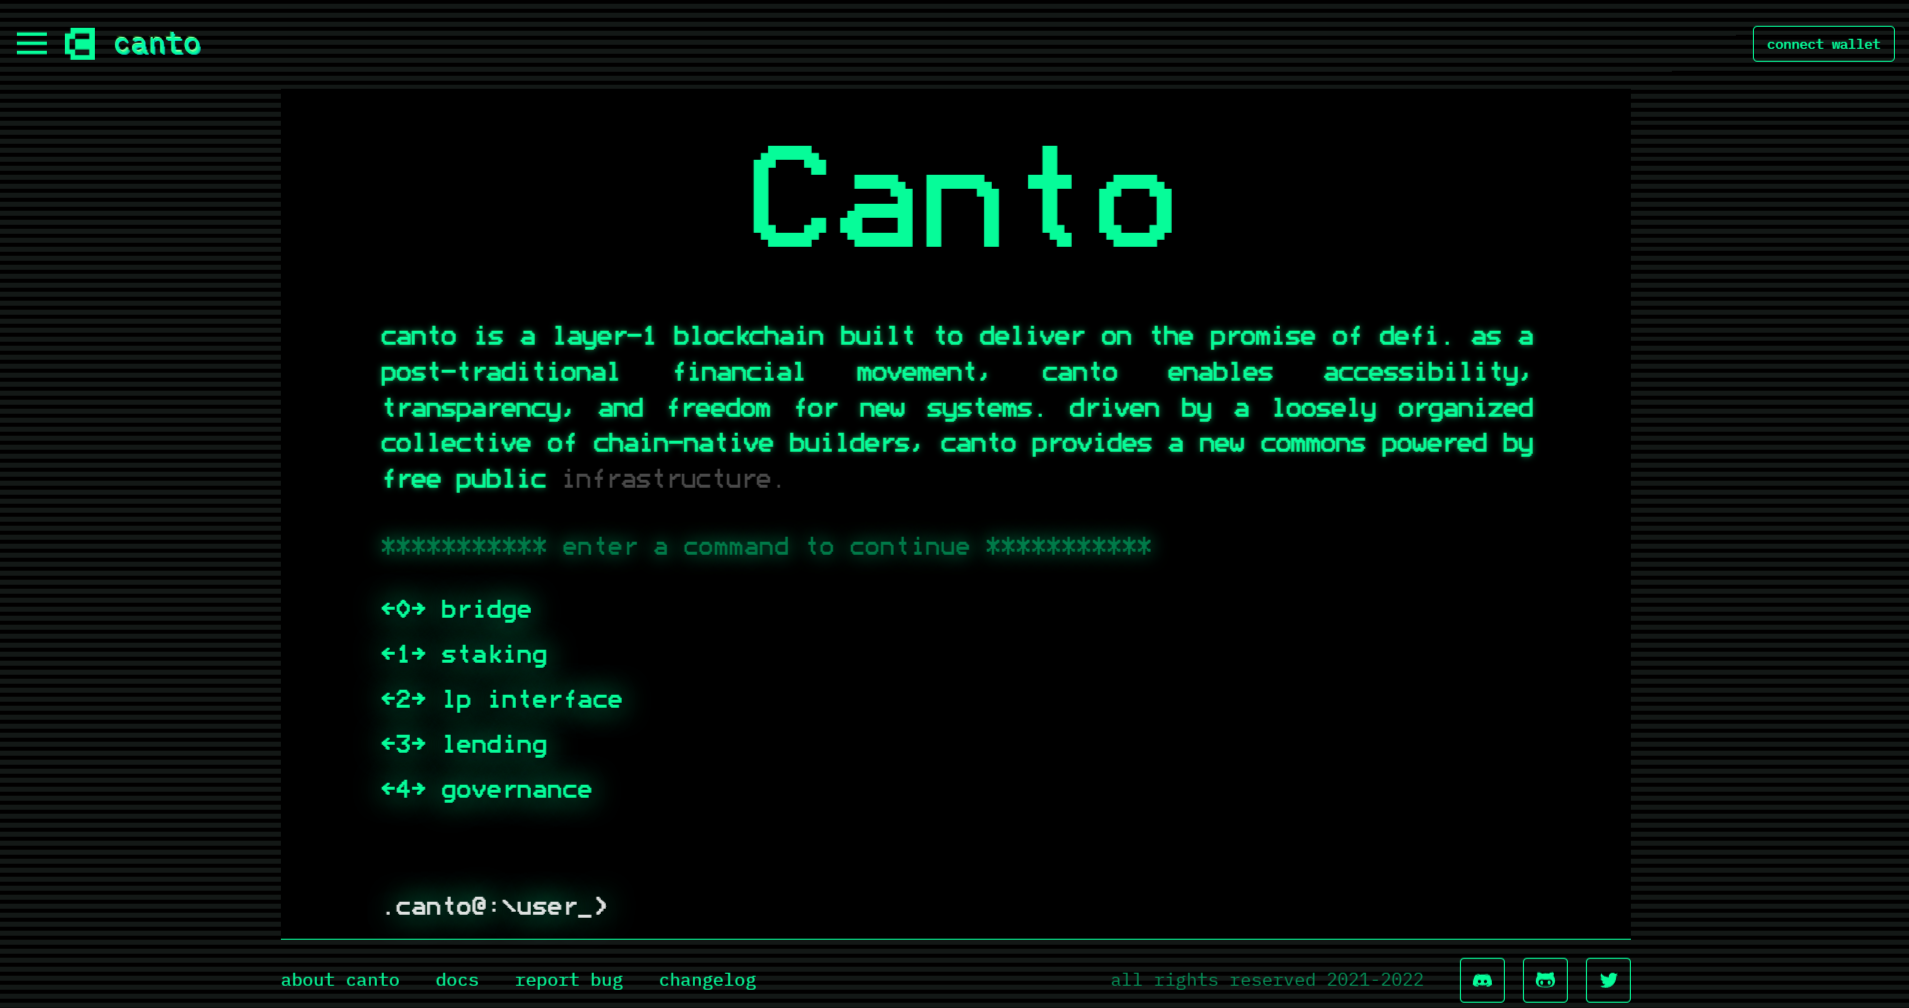 Canto (CANTO) blockchain launched in Q3, 2022